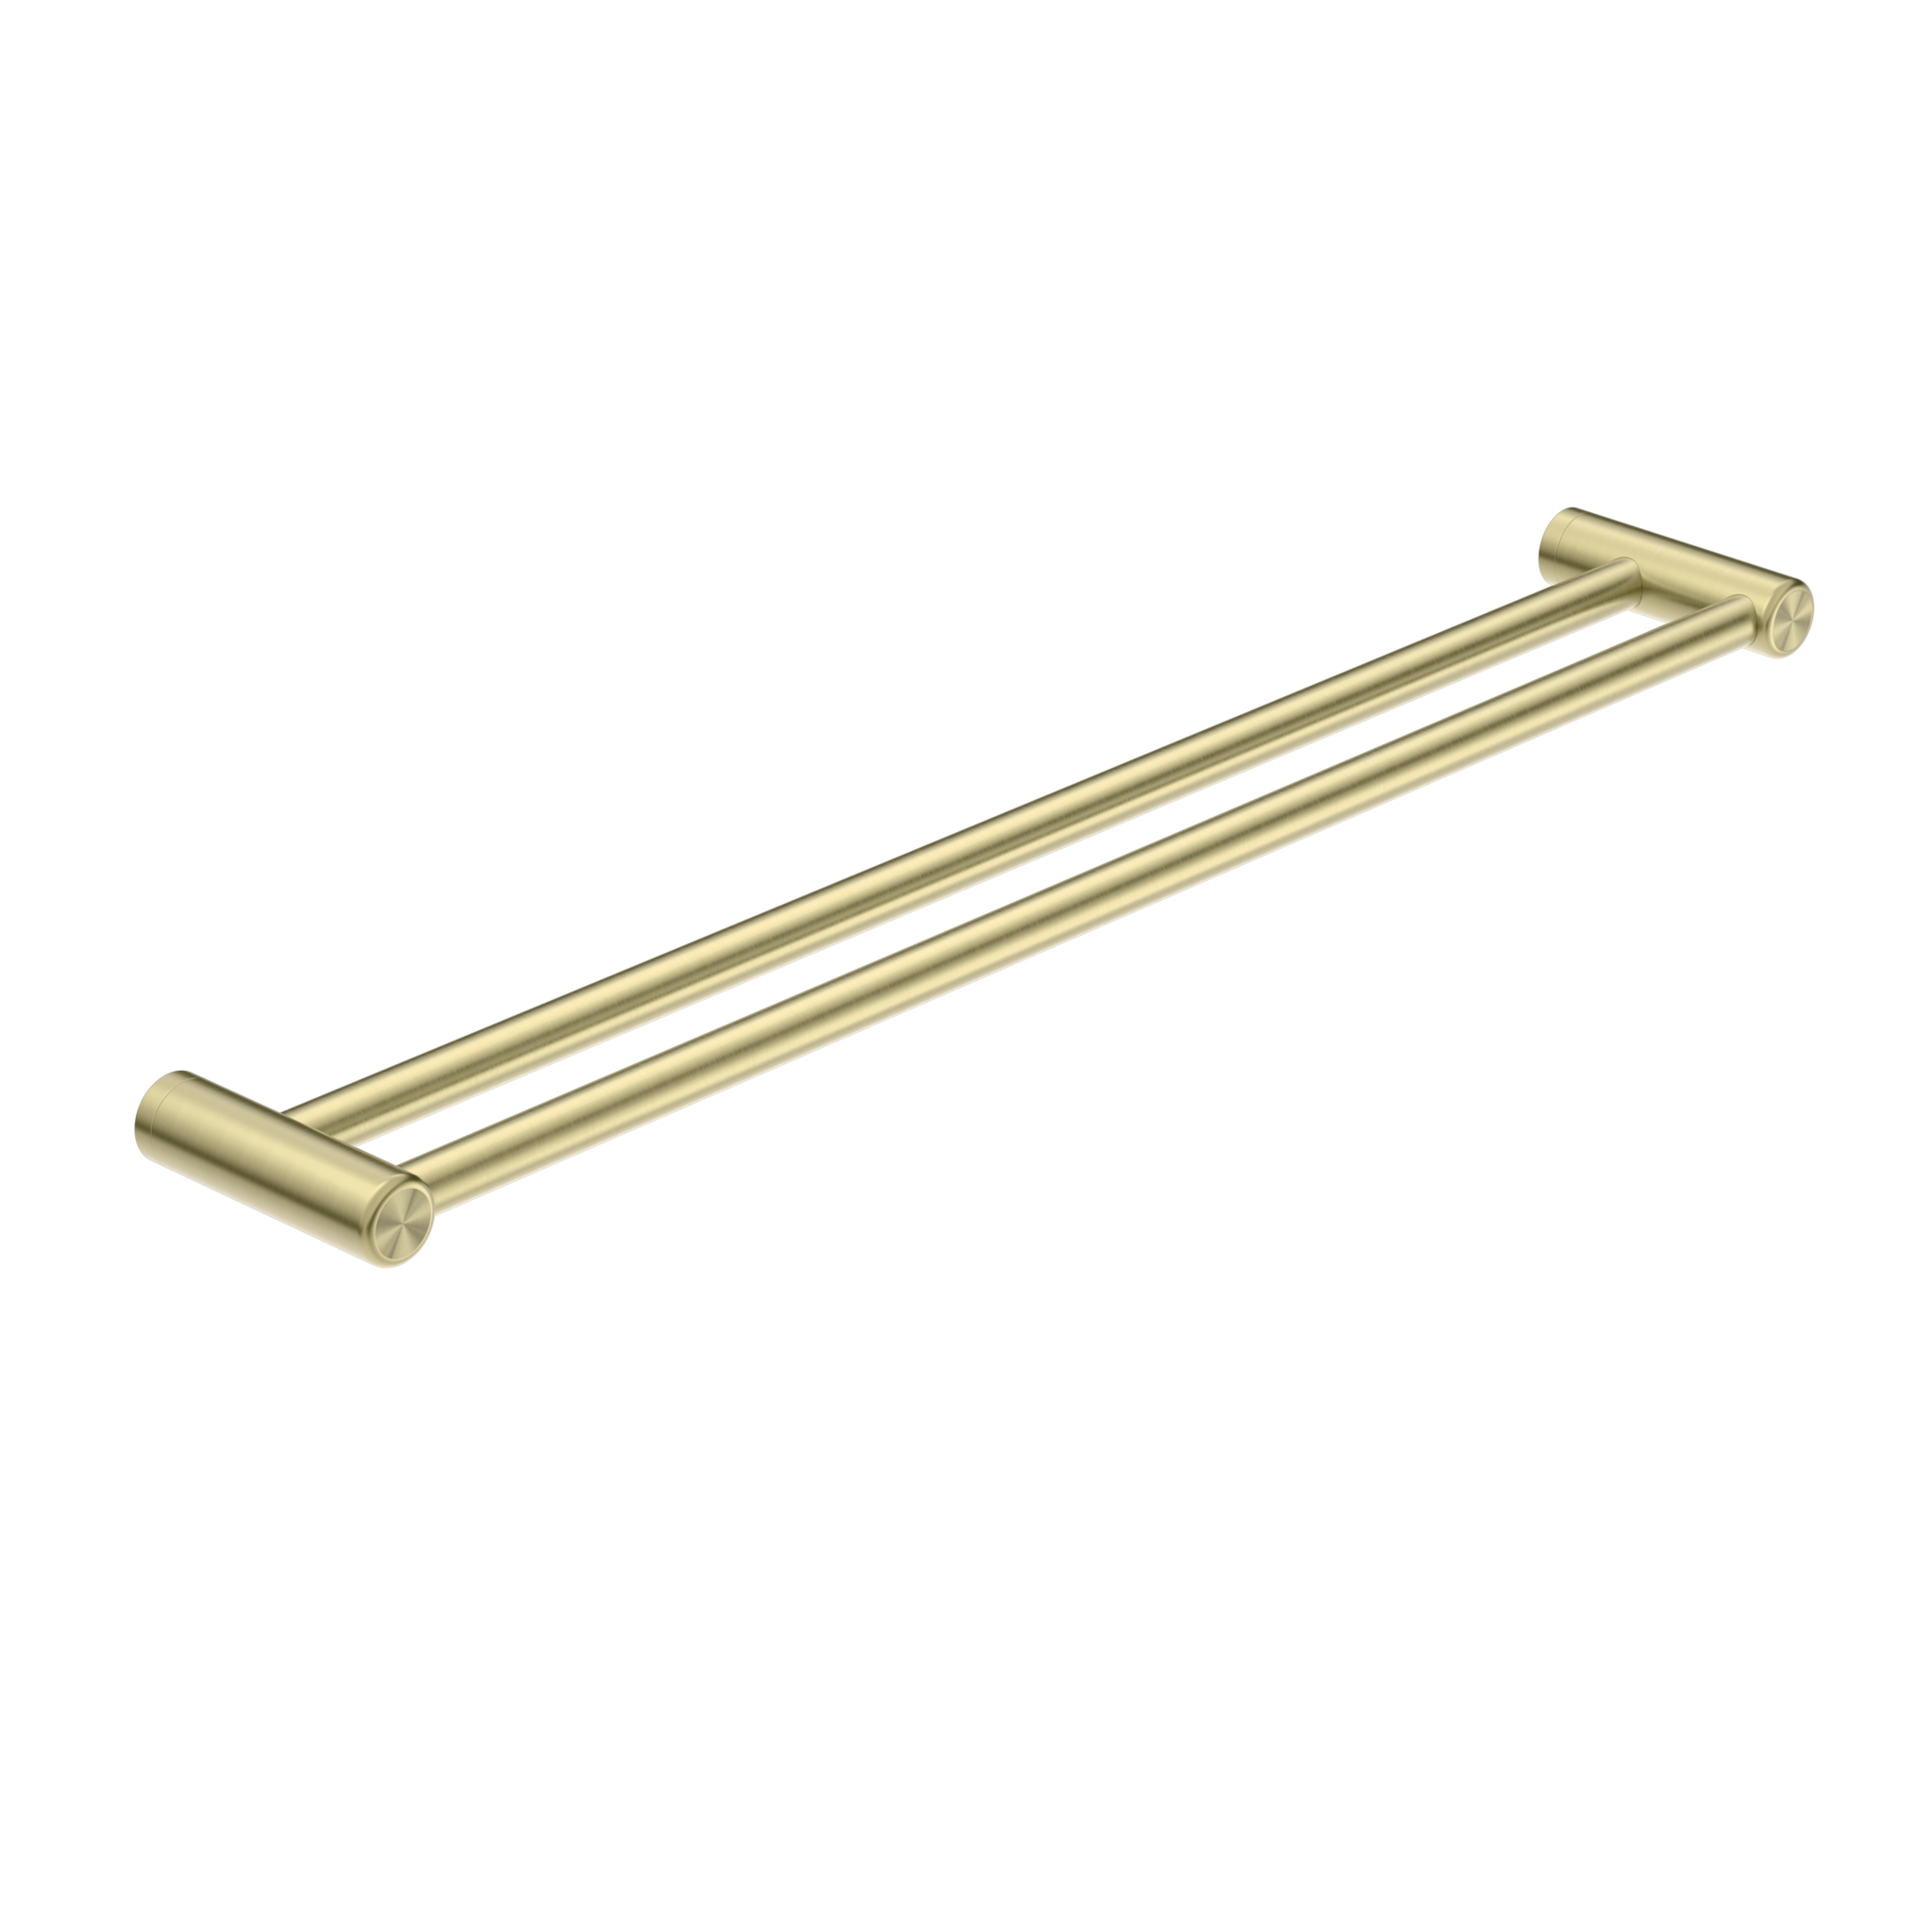 CALIBRE MECCA 25MM DOUBLE TOWEL GRAB RAIL 900MM BRUSHED GOLD